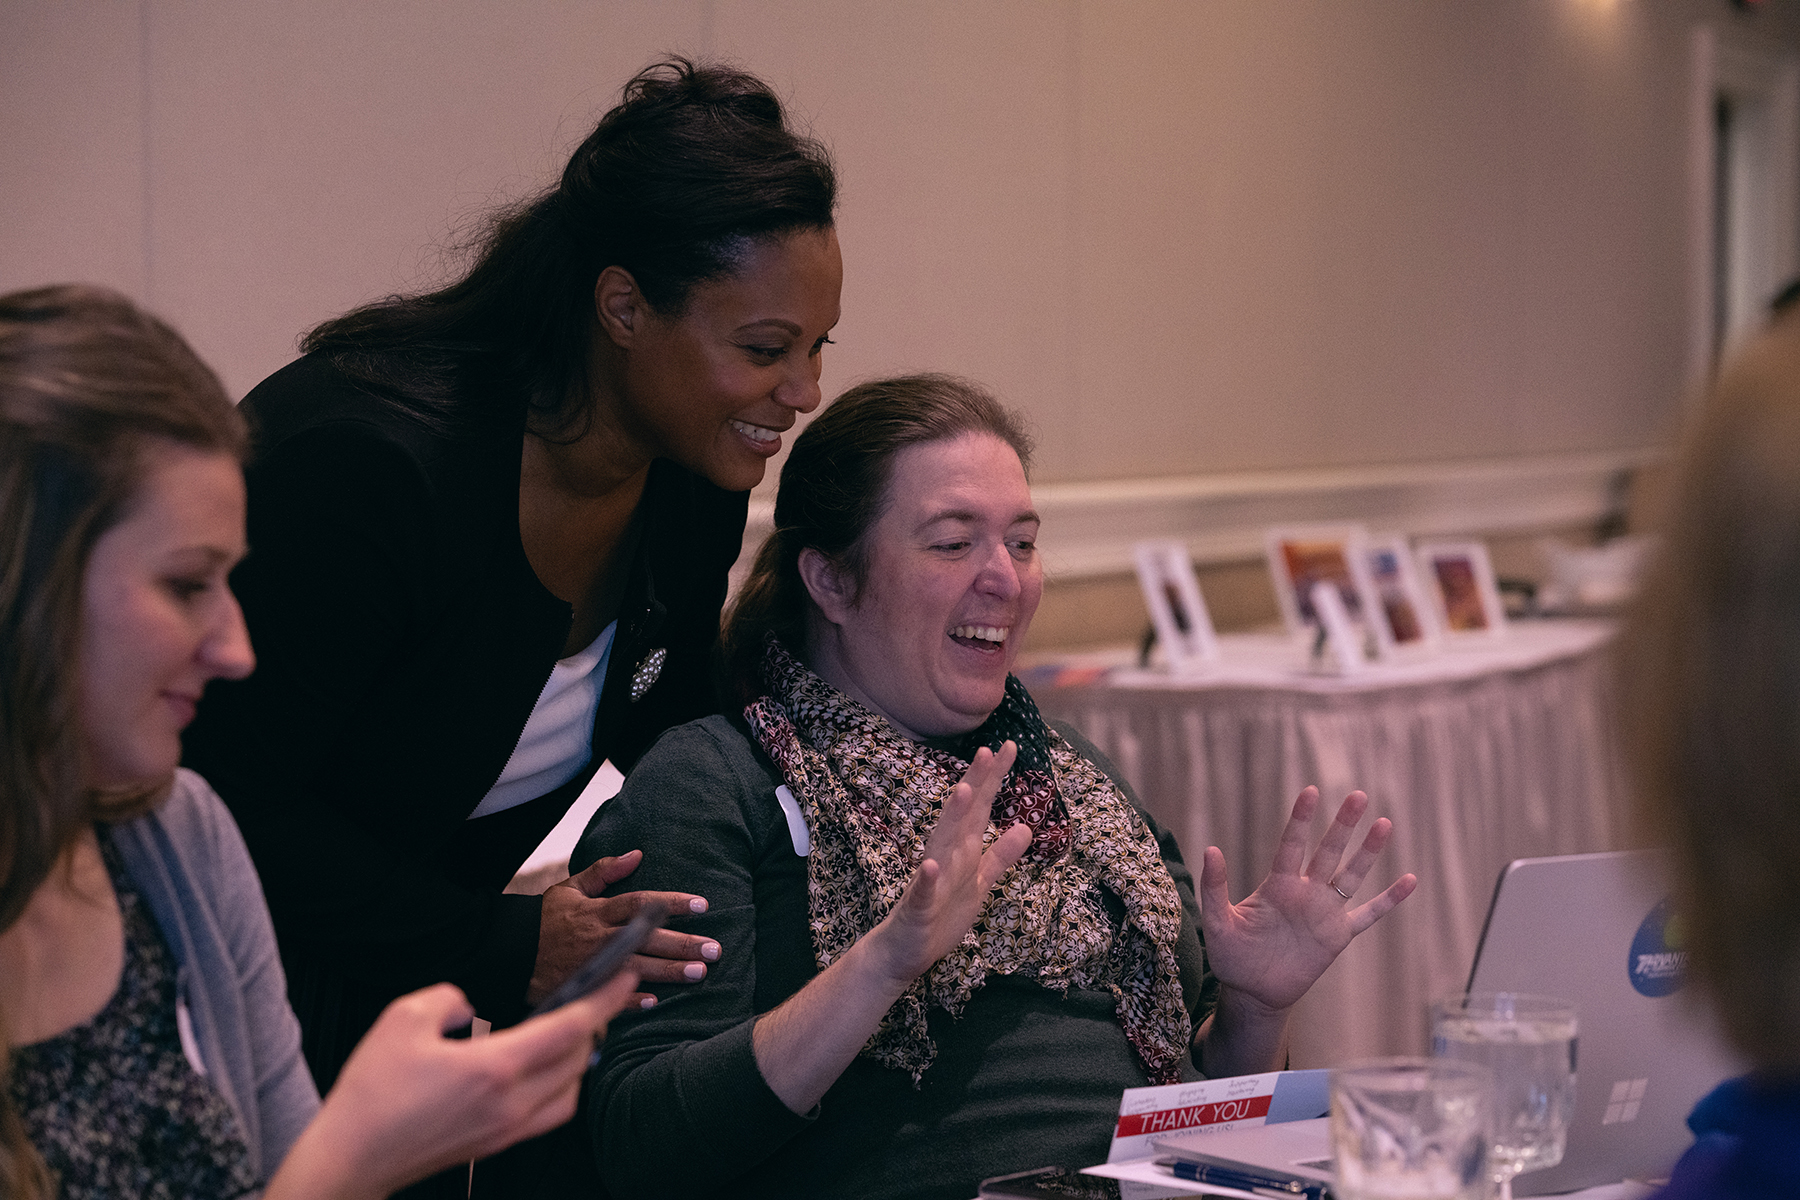 Keynote speaker Leah JM Dean shares a laugh with attendees at the at the Adventist Women Leaders (AWL) luncheon held January 11, 2023, at the conclusion of the North American Division 2023 “Replenish” Adventist Ministries Convention